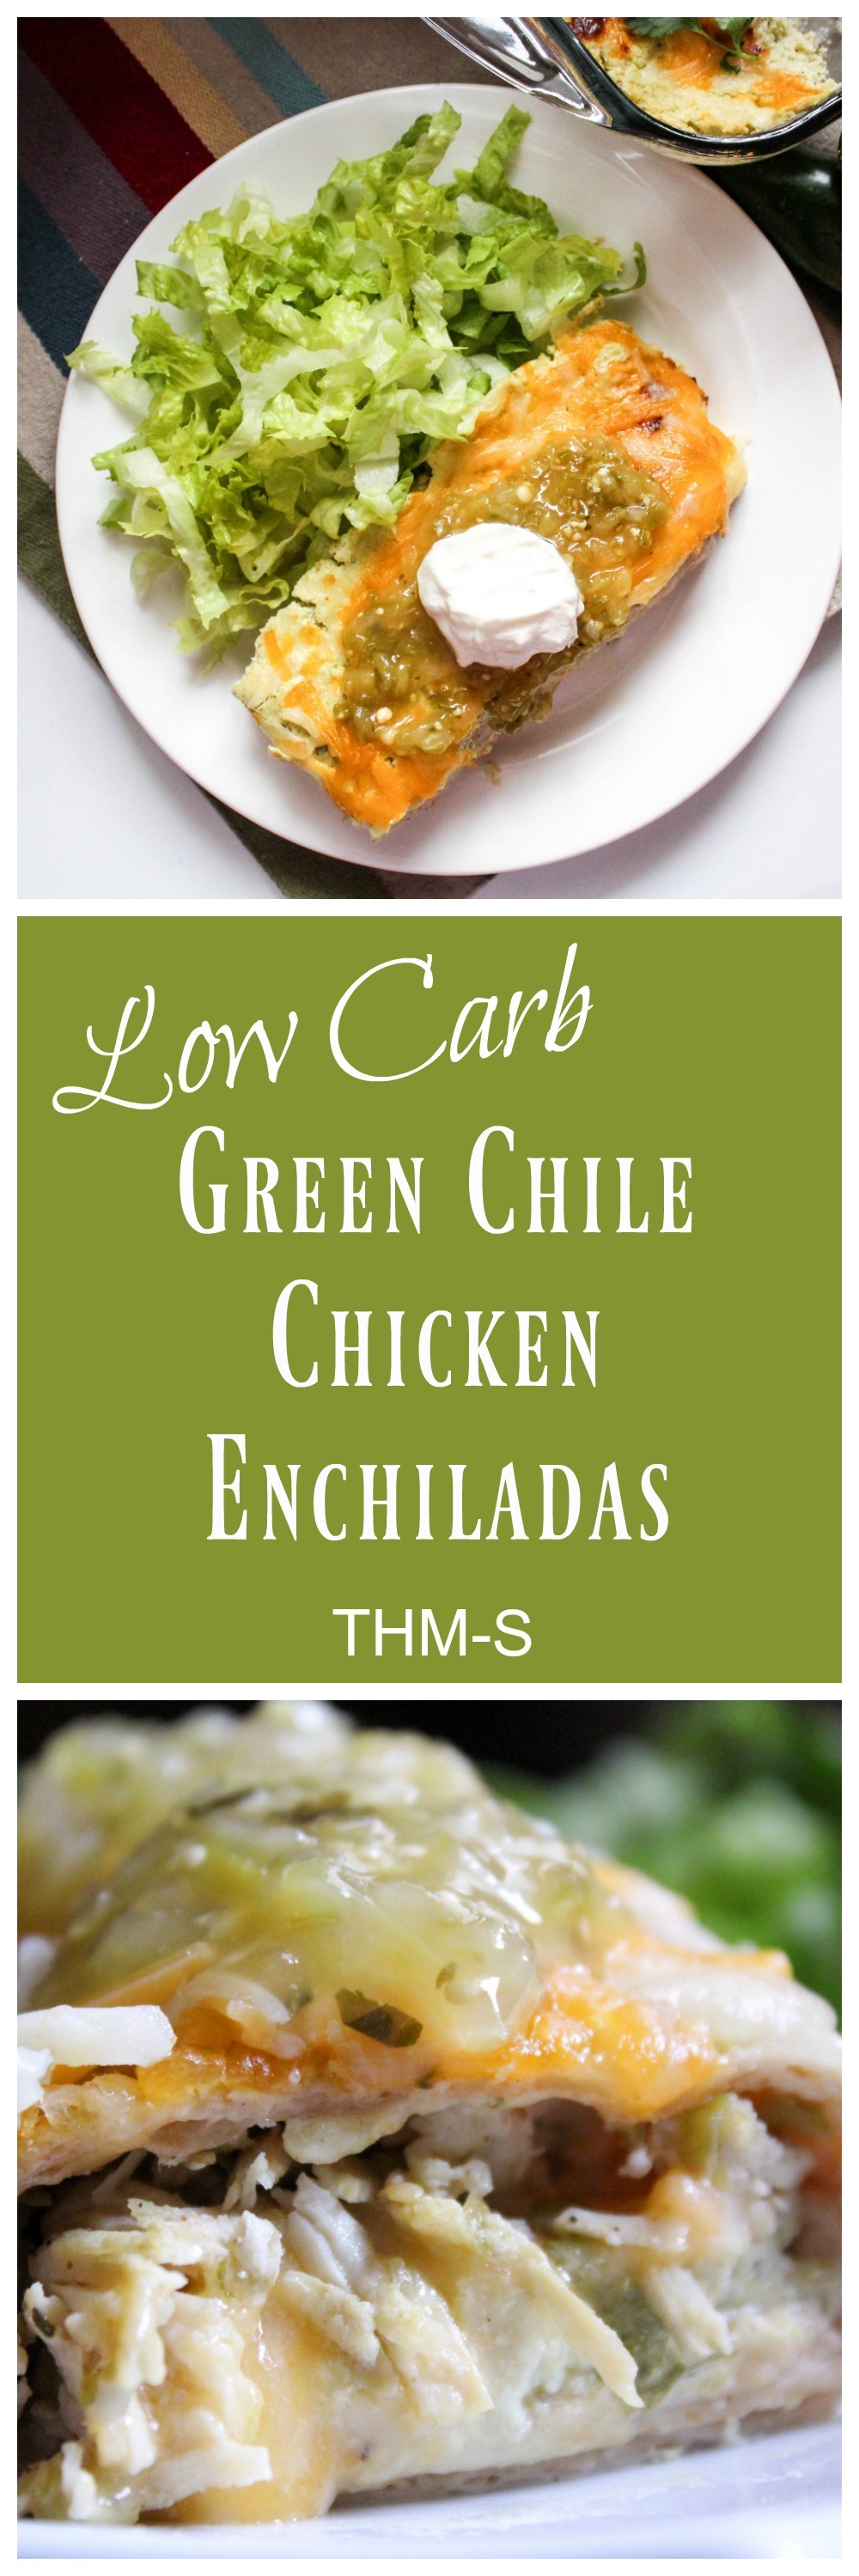 Green Chile Chicken Enchiladas (THM-S, Low Carb)